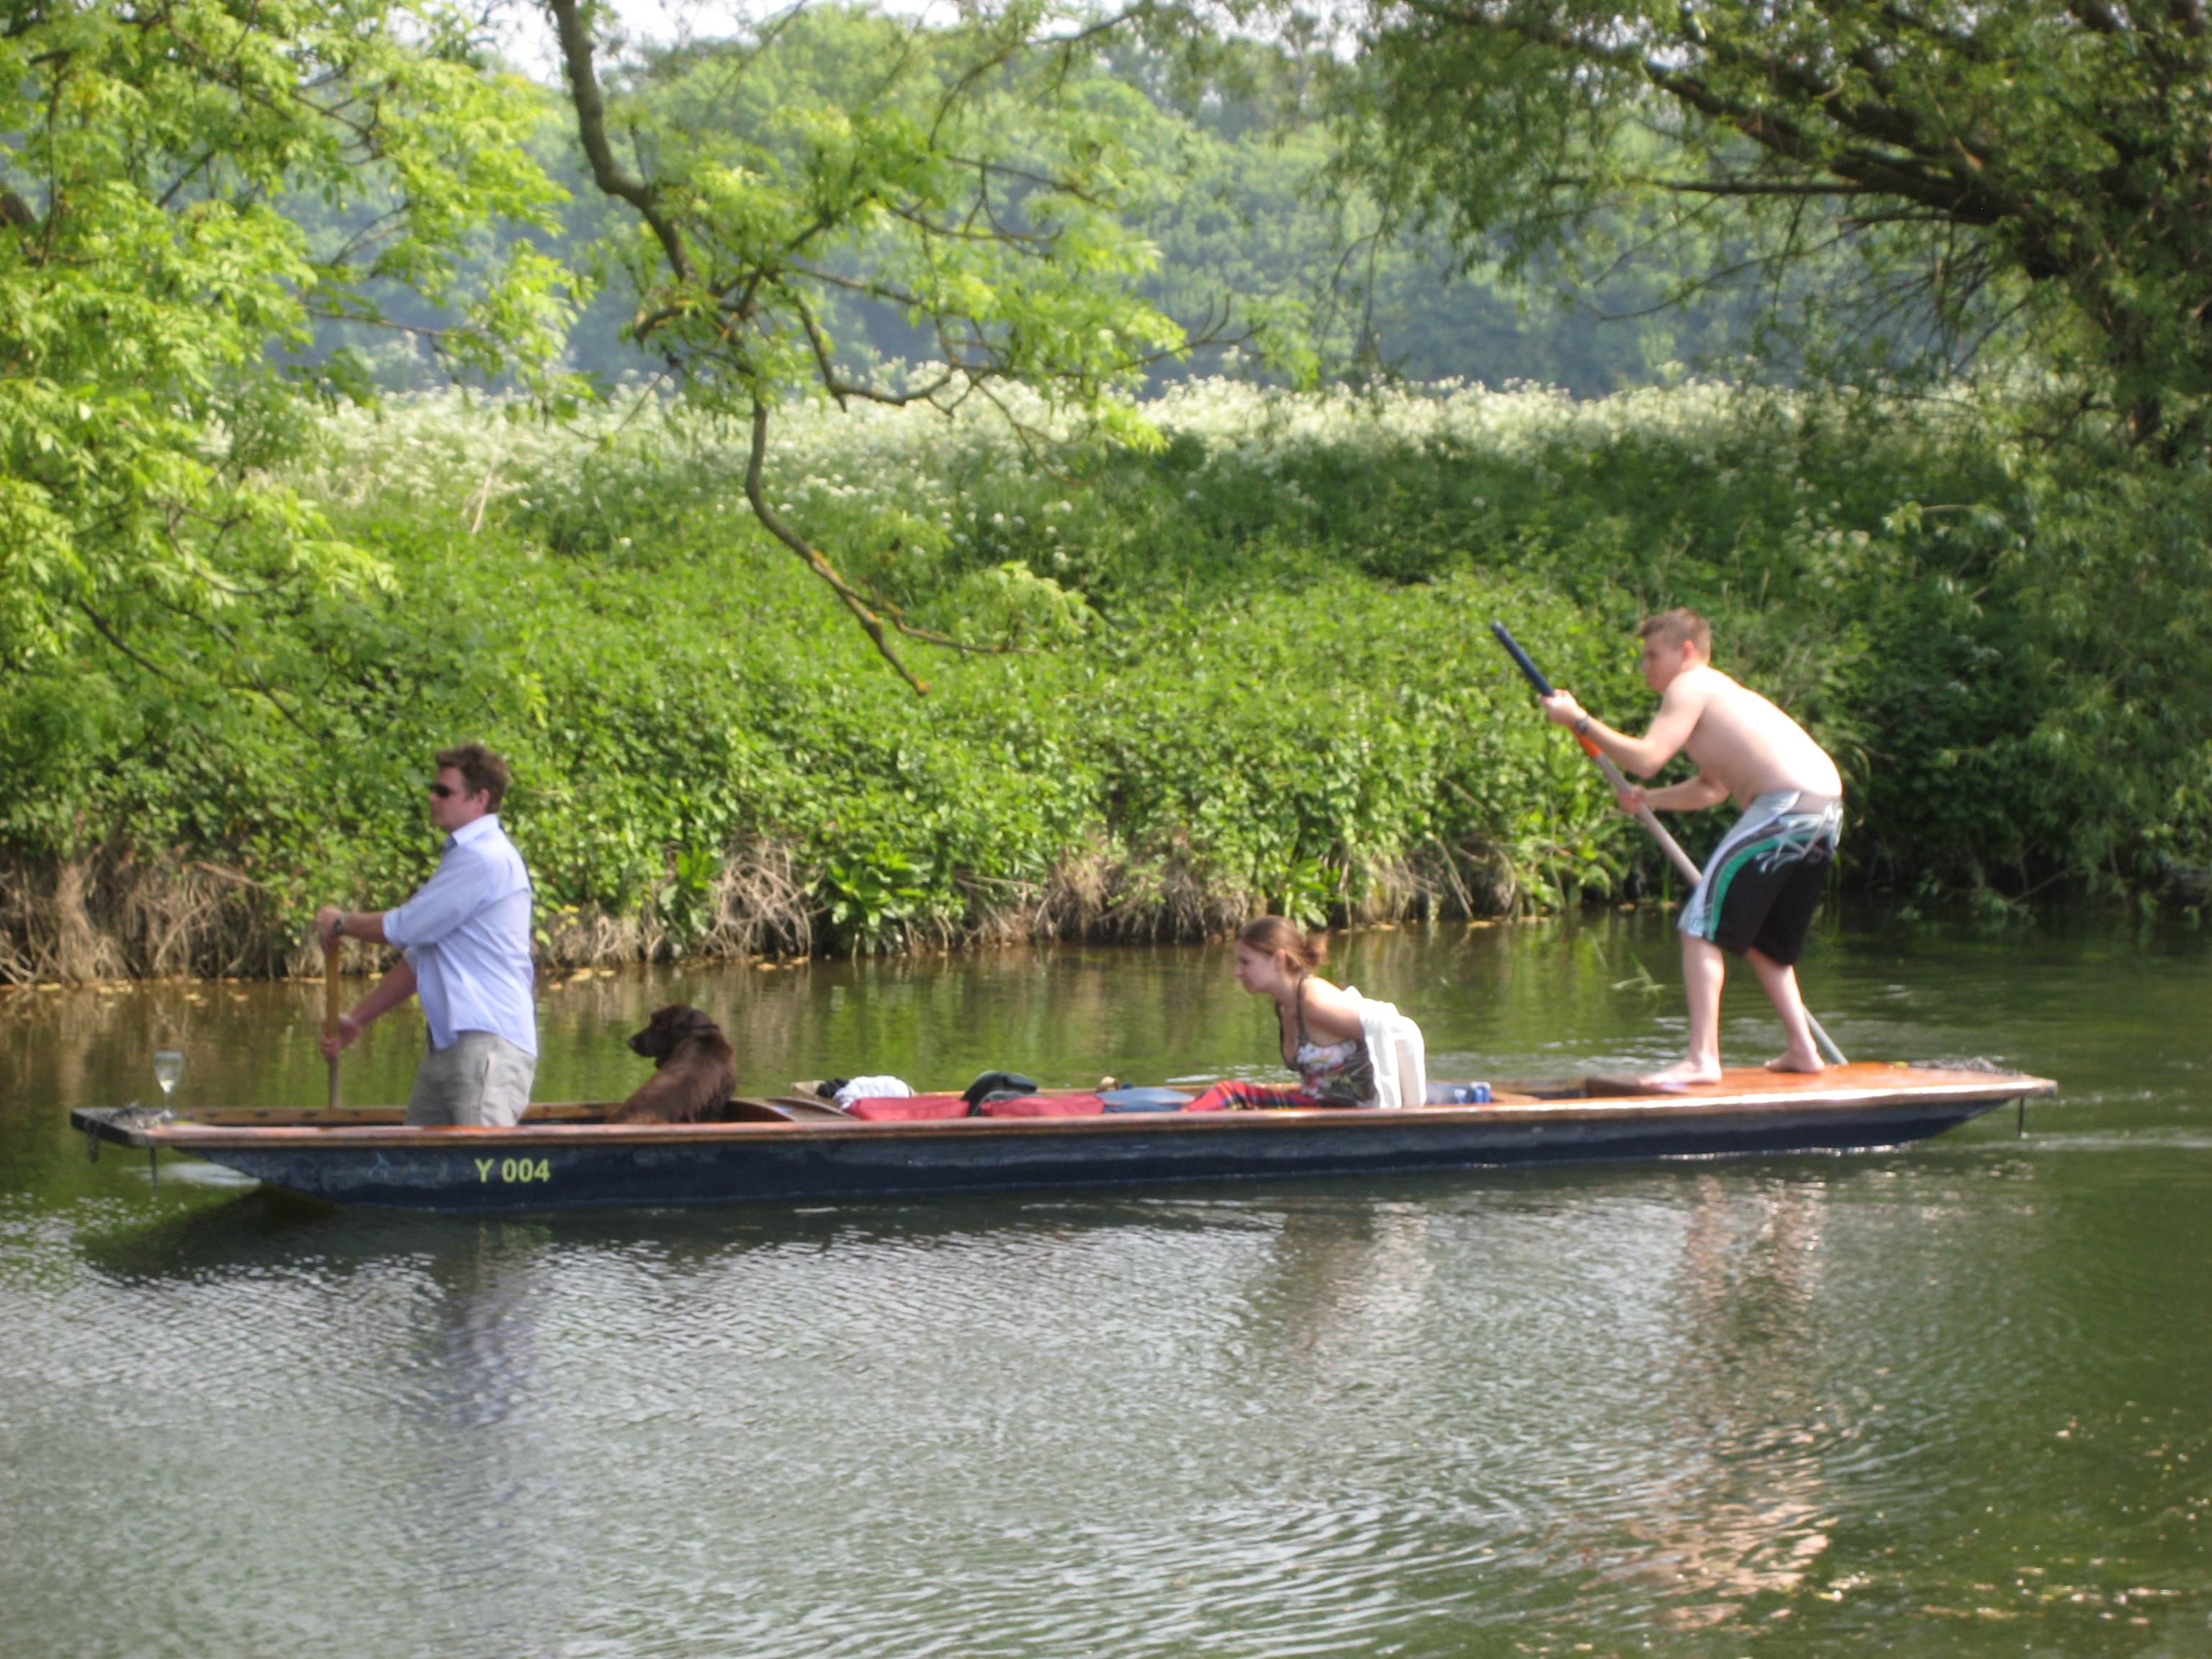 File:Punting at Grantchester.jpg - Wikimedia Commons